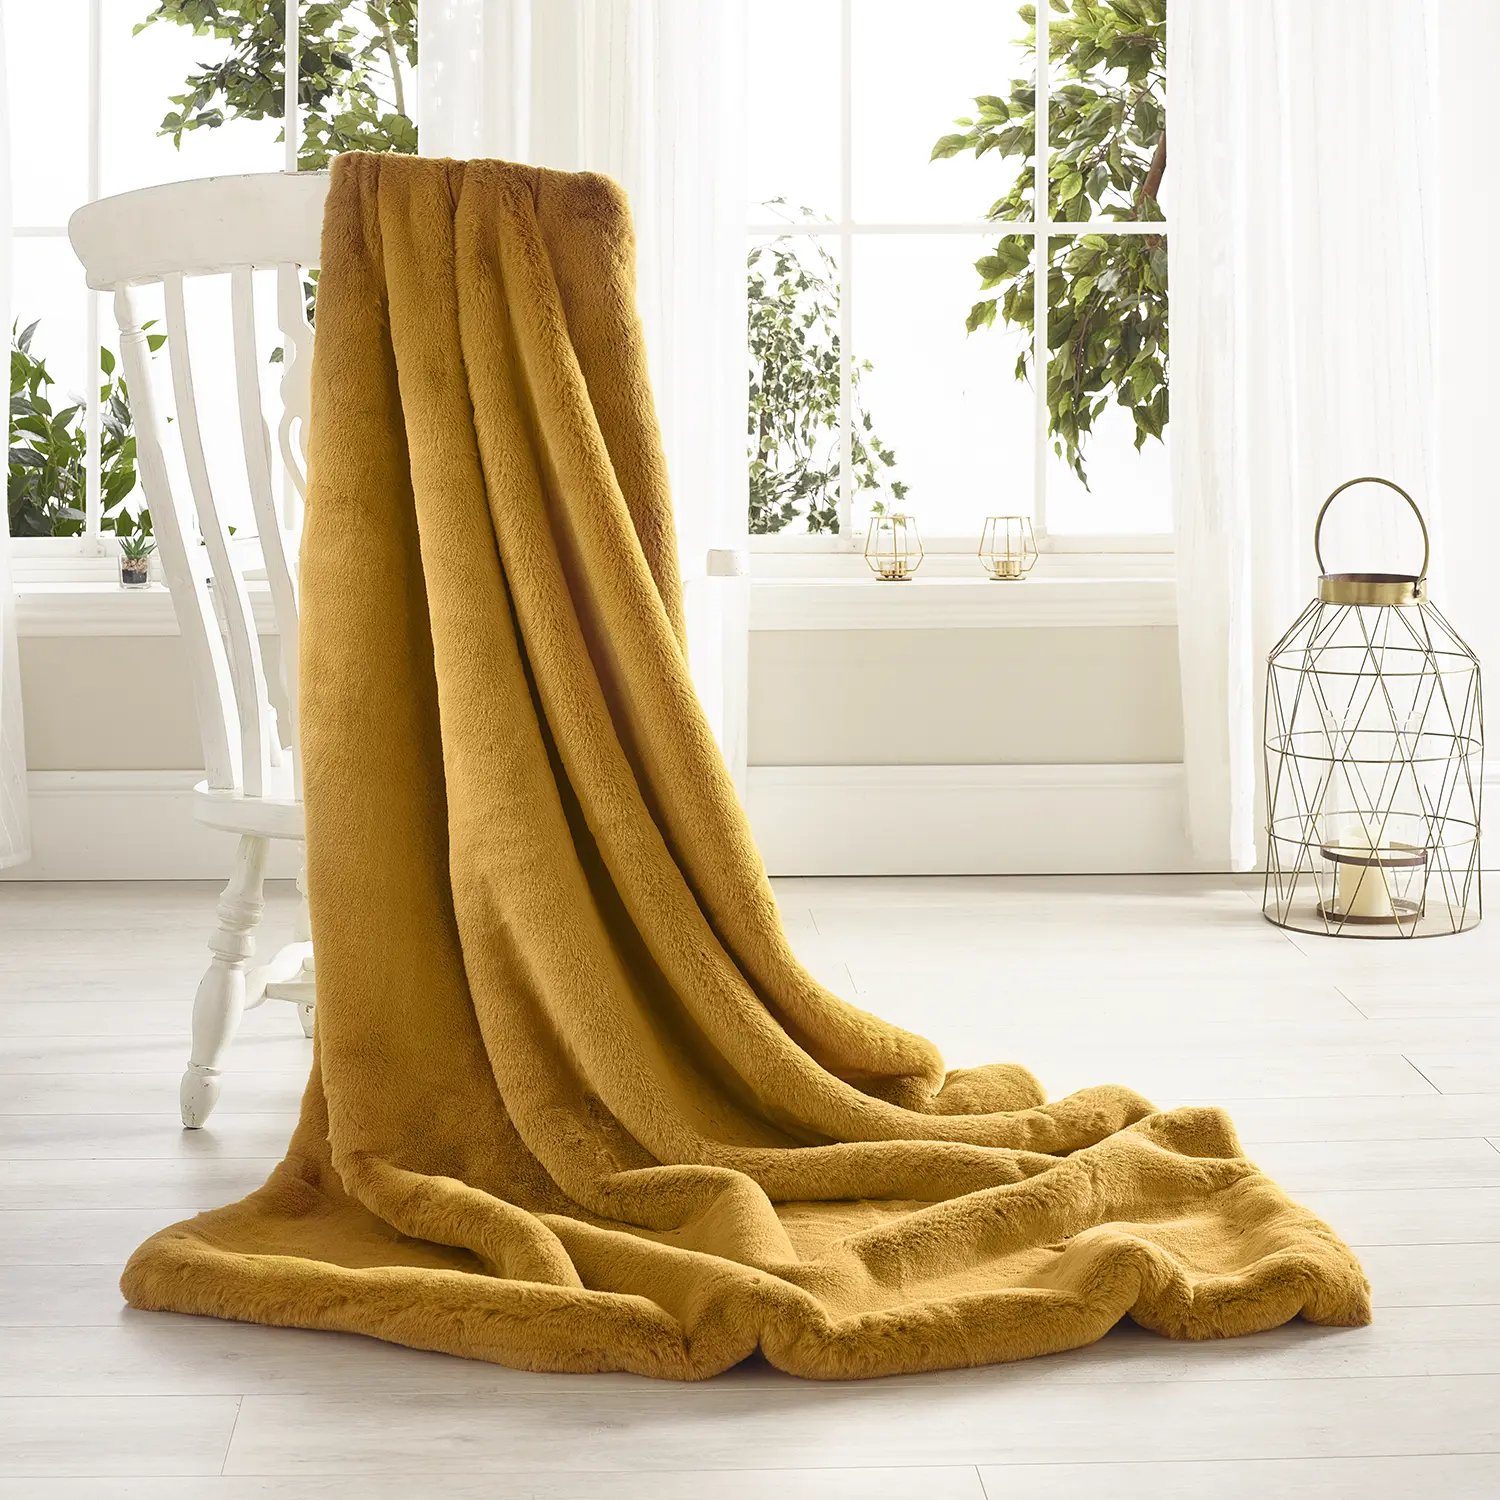 Soft Mustard Luxury Faux Fur Throws and Cushions